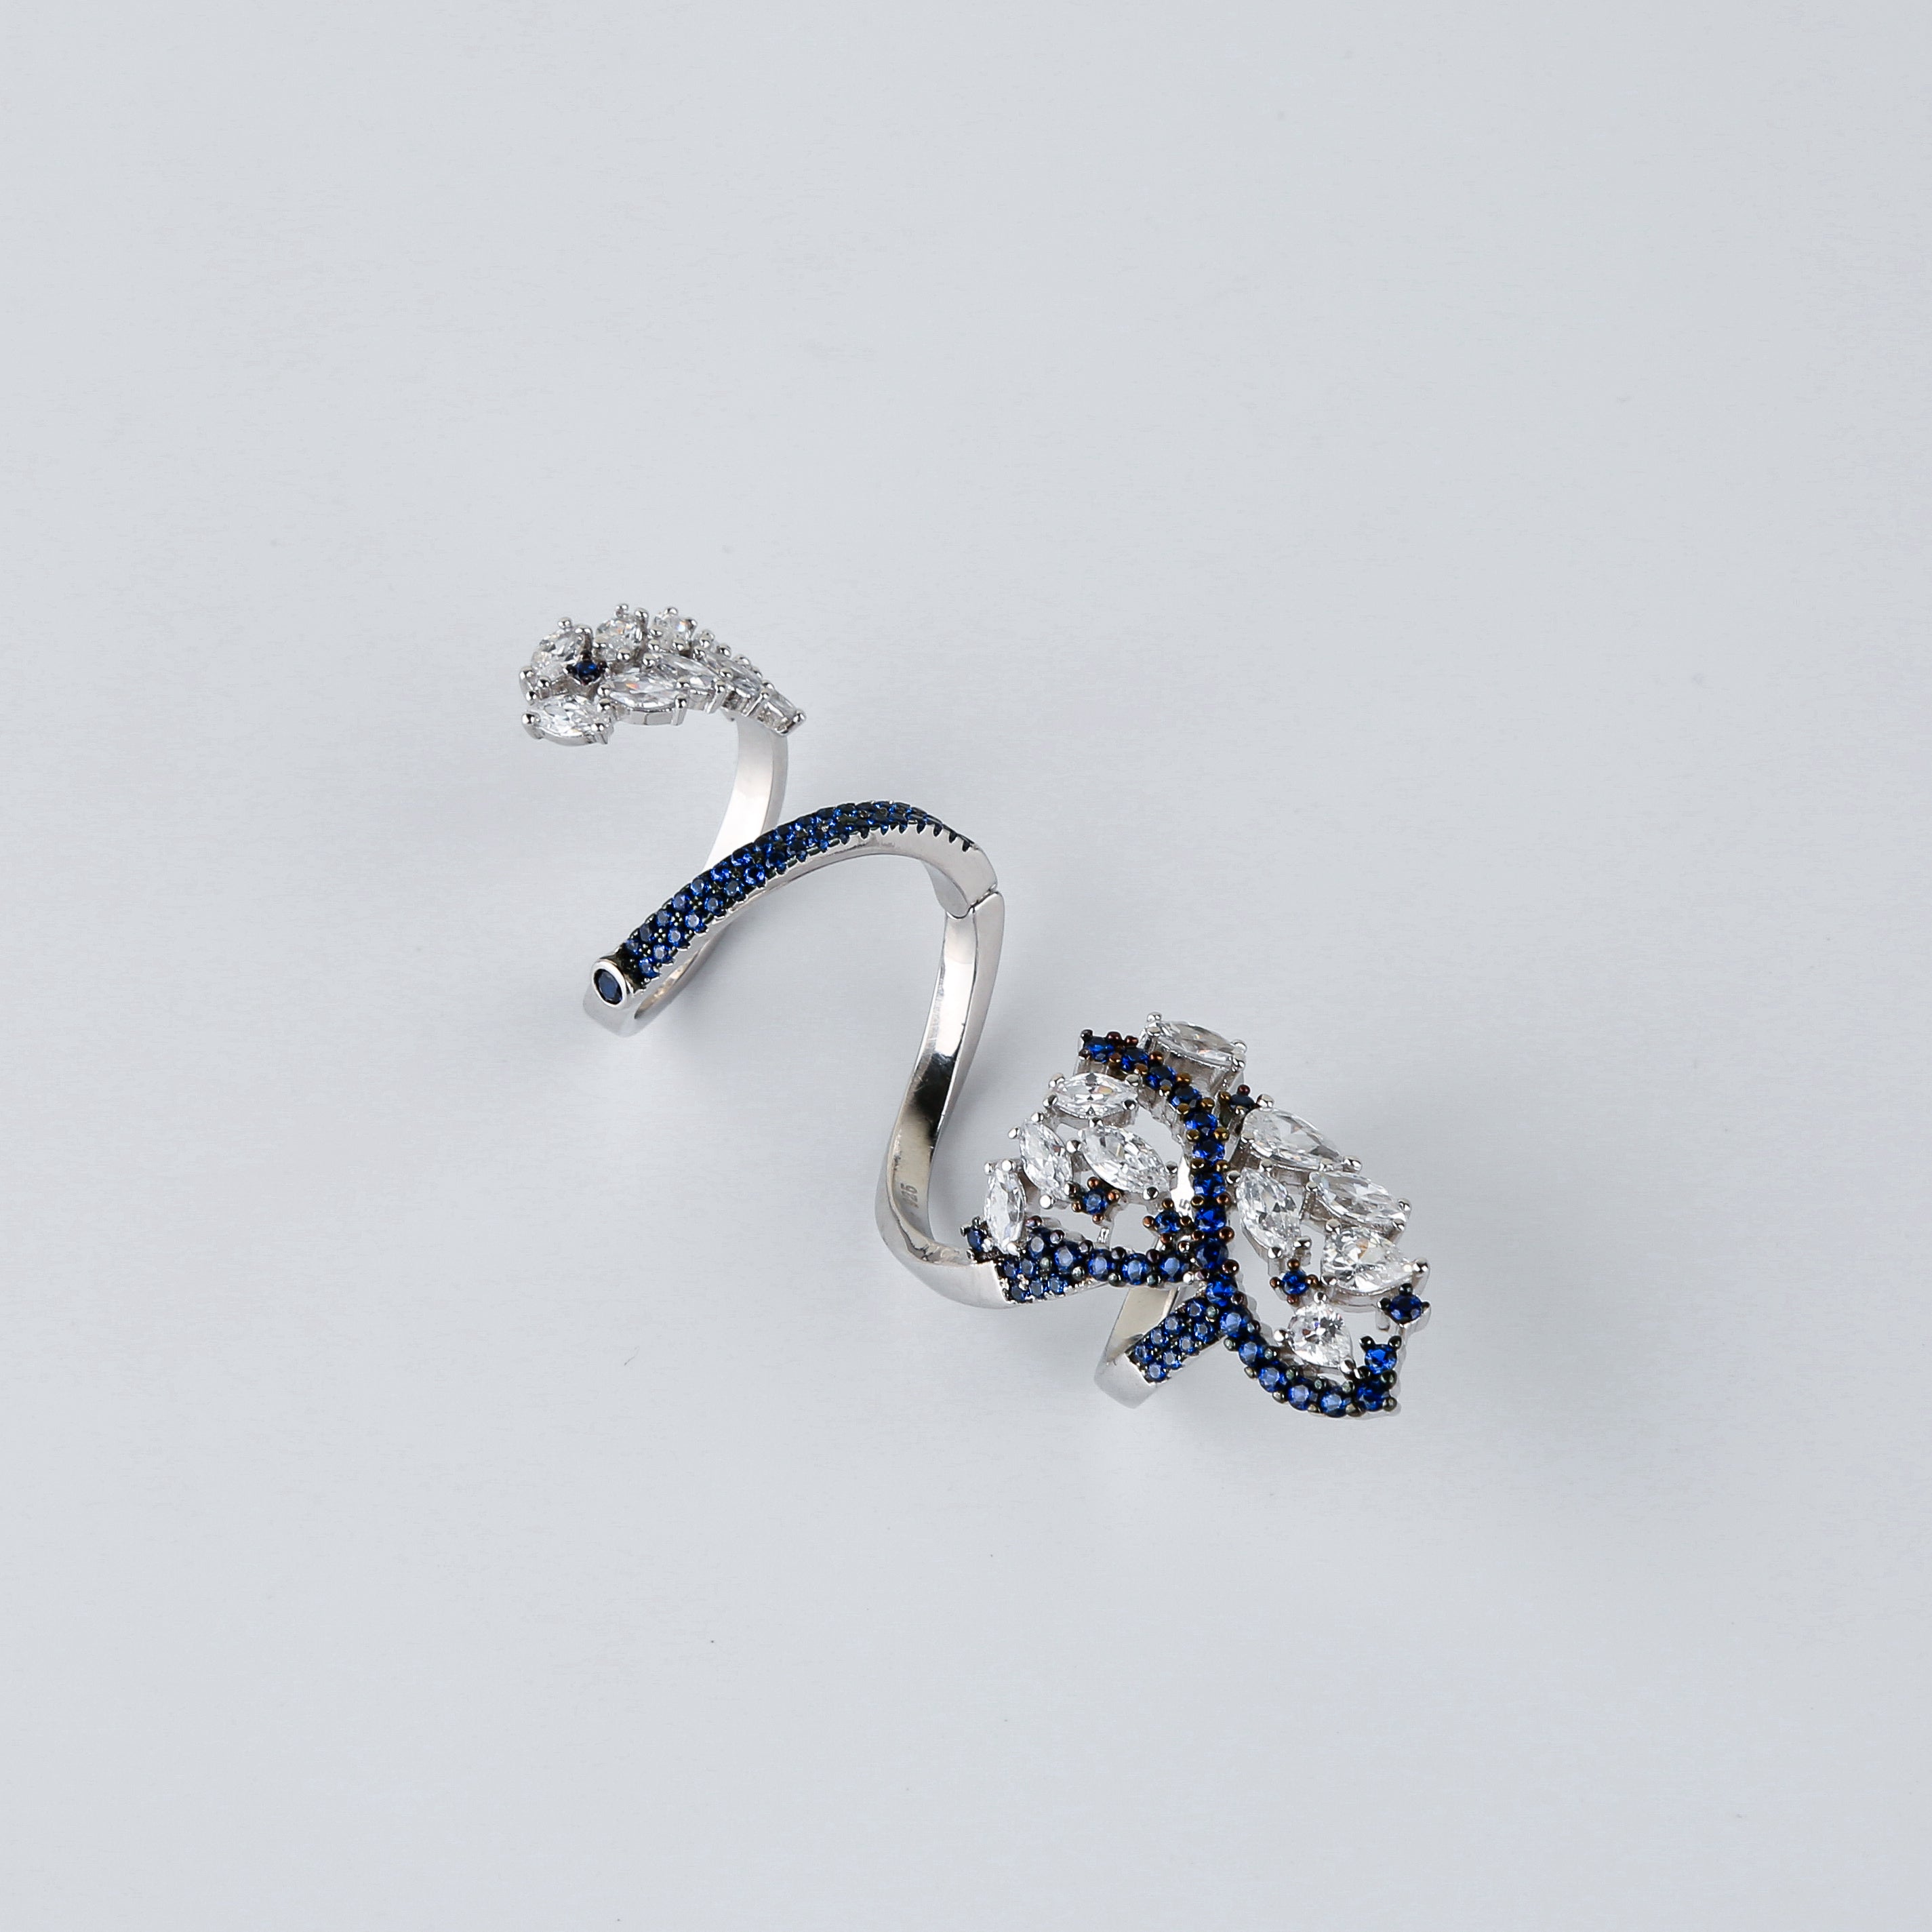 The Foldable Cocktail Peacock Crown Ring